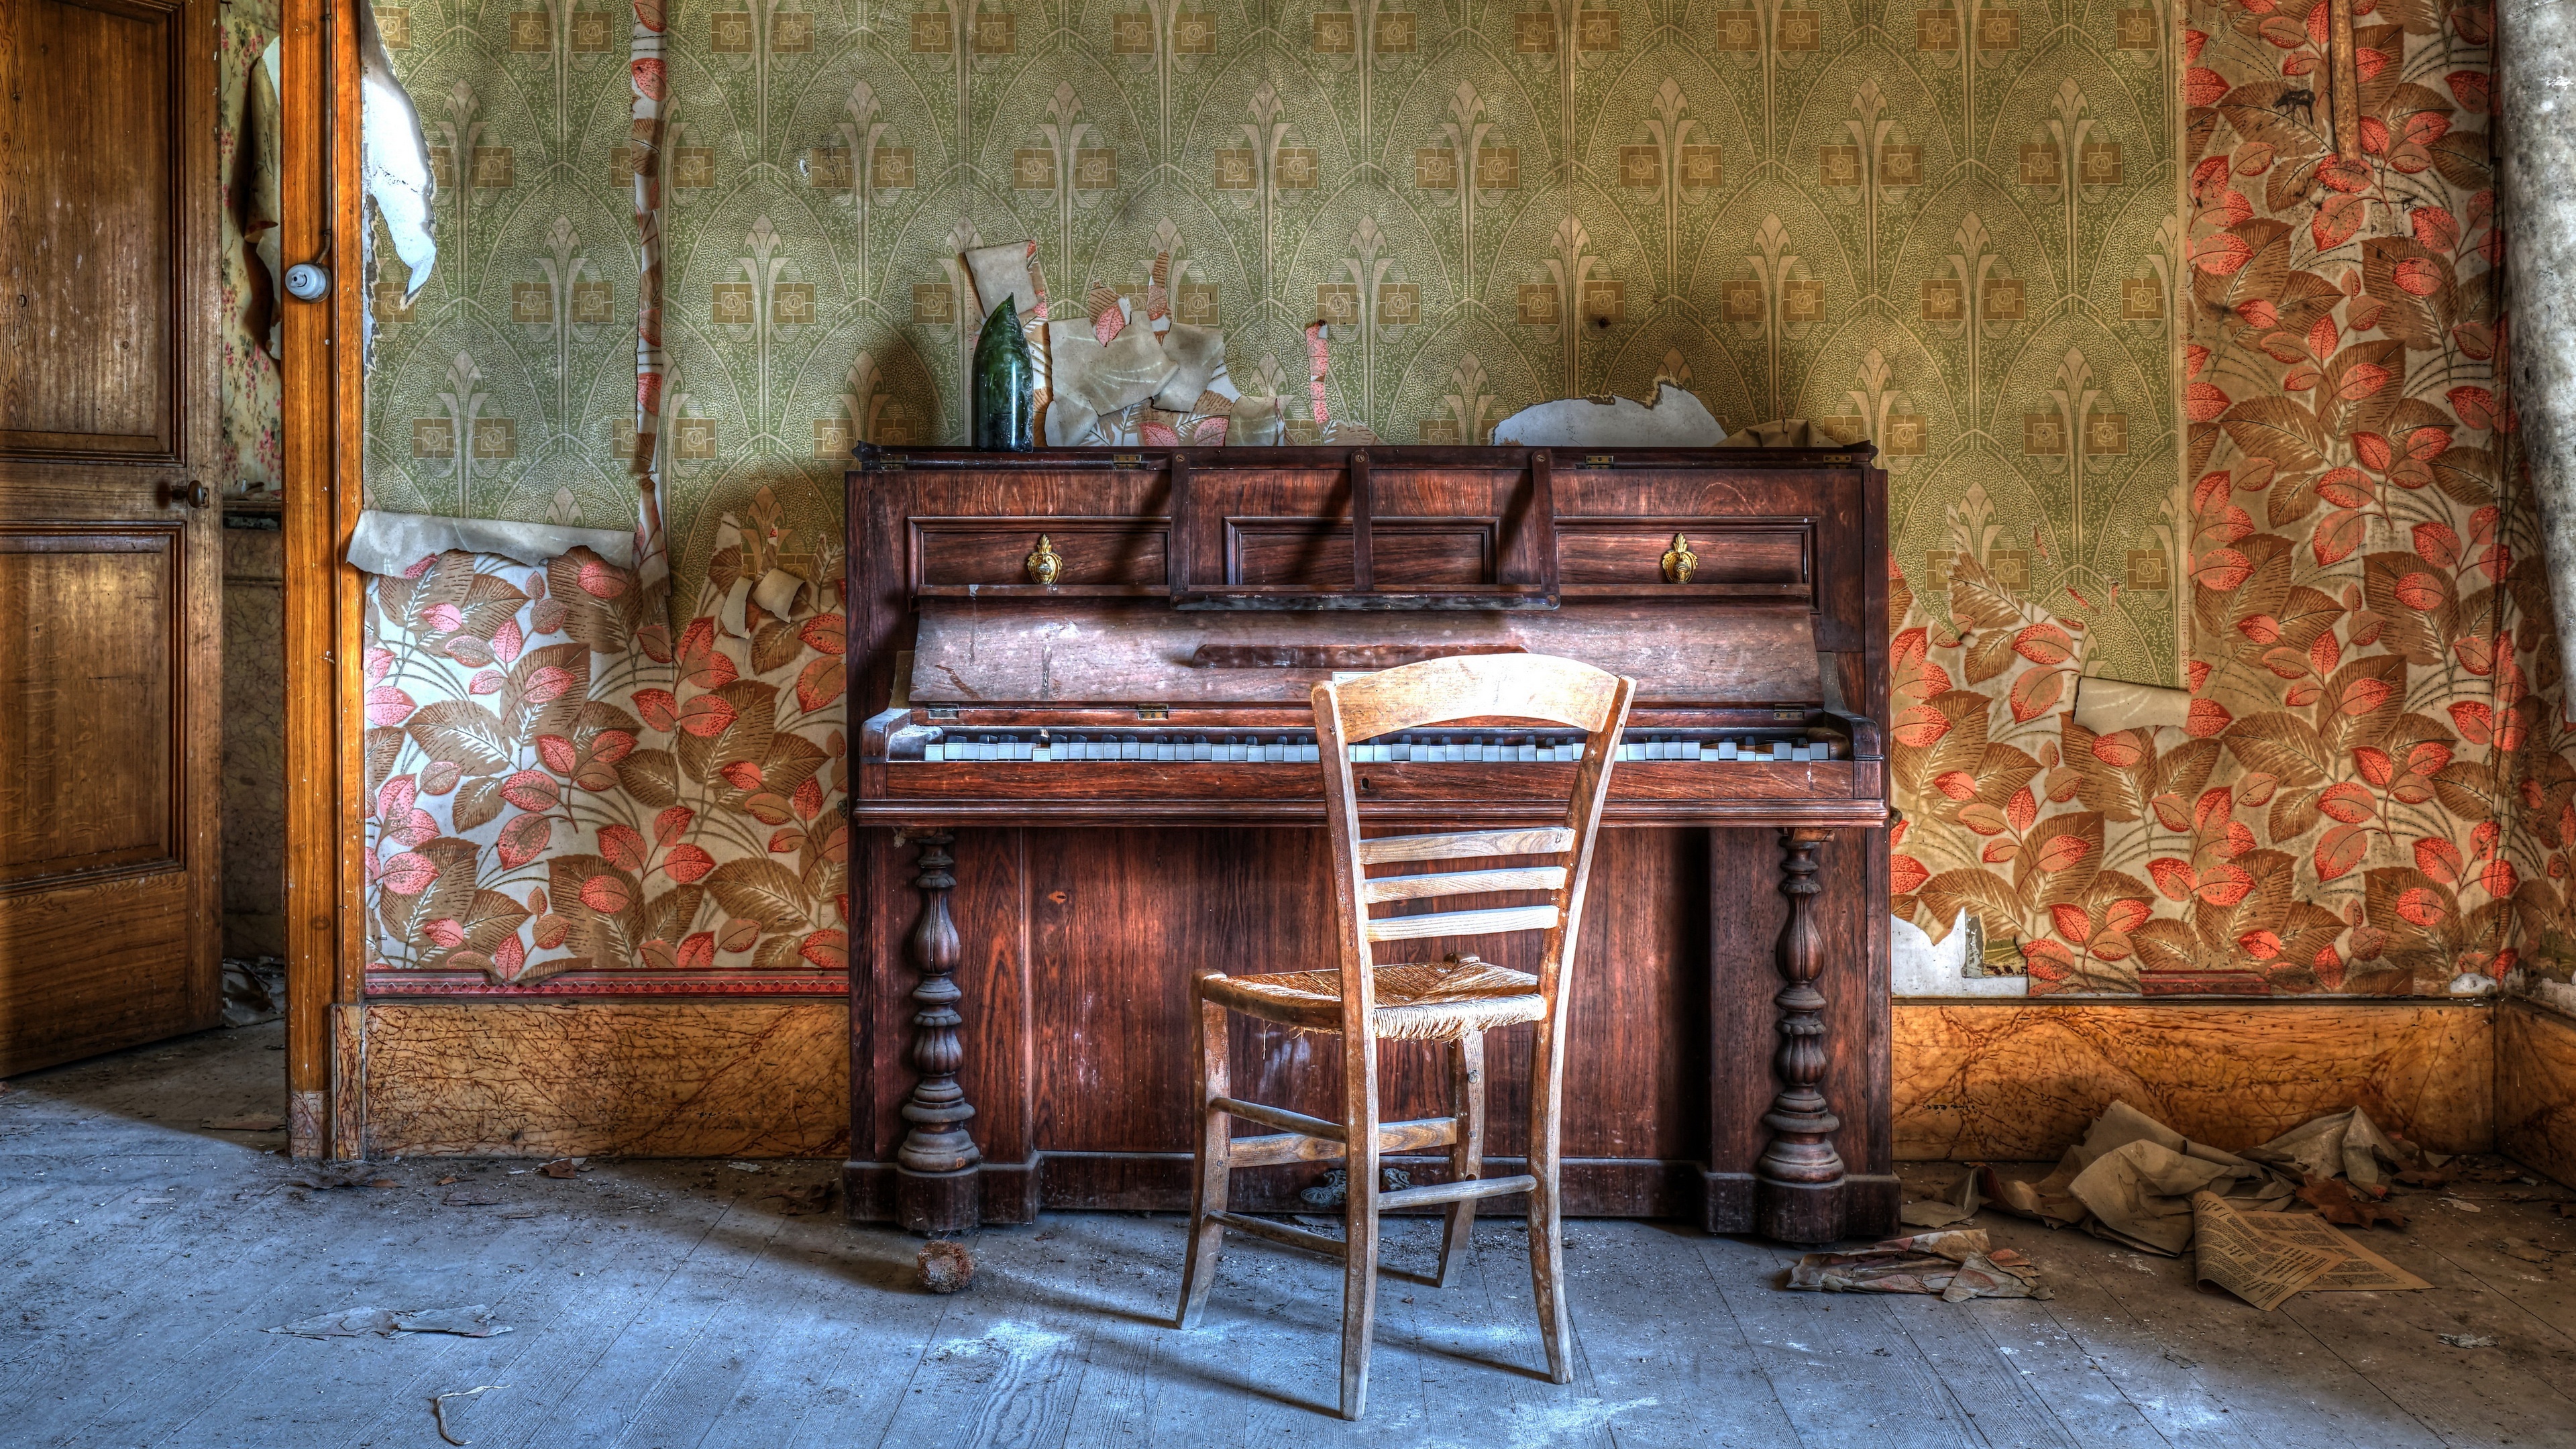 Fortepiano: Vintage Instrument, Upright Piano, Carved Wooden Ornaments. 3840x2160 4K Wallpaper.